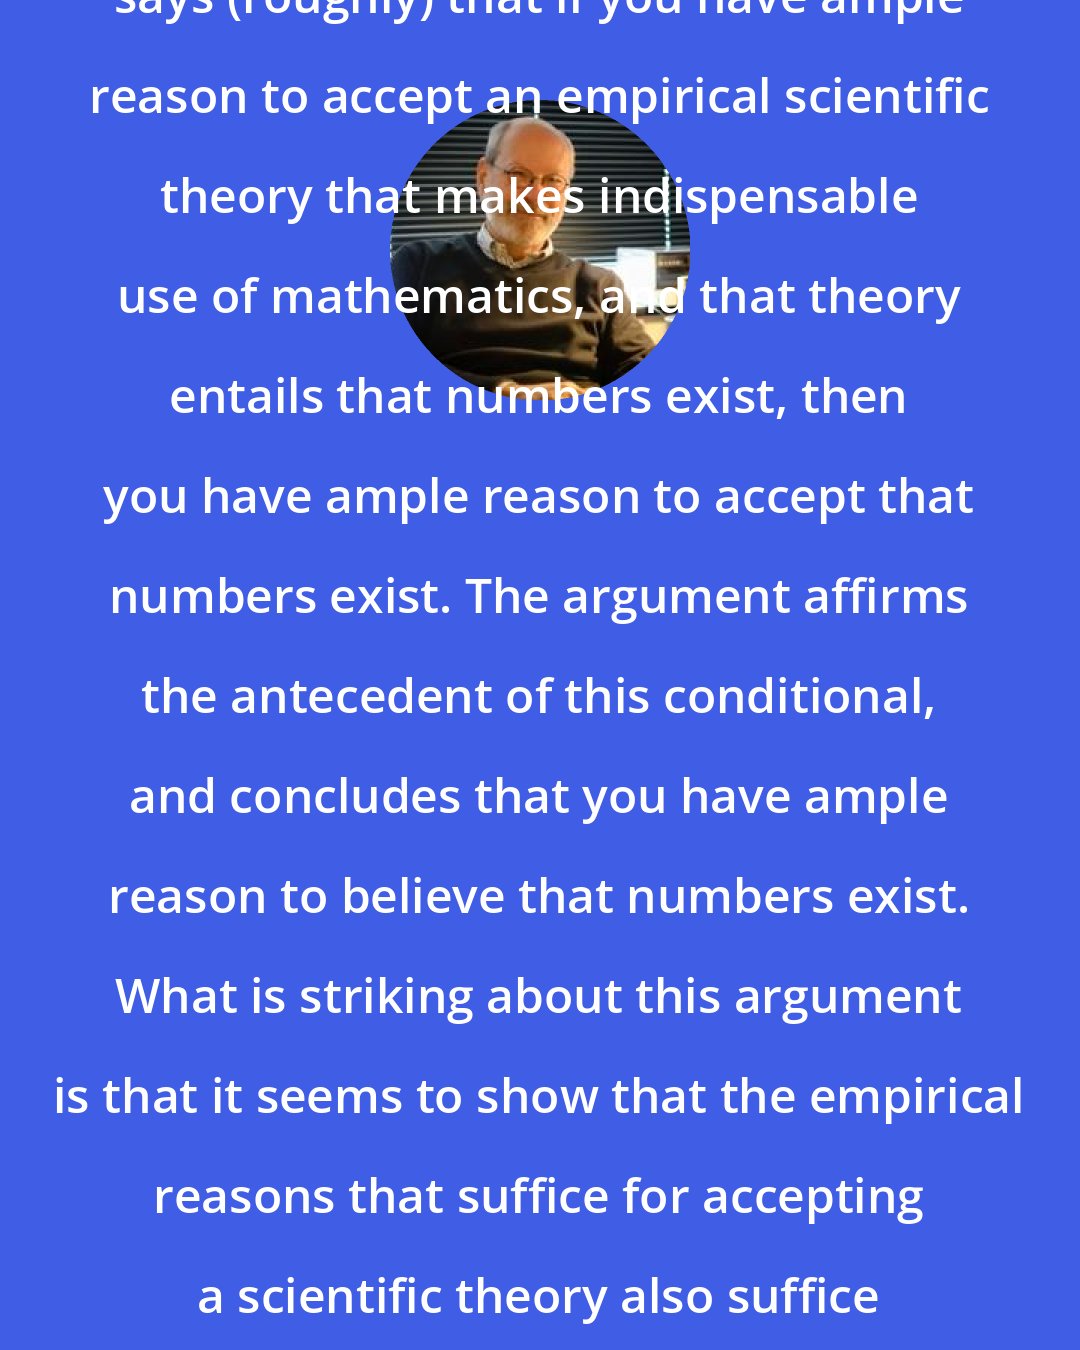 Elliott Sober: The indispensability argument says (roughly) that if you have ample reason to accept an empirical scientific theory that makes indispensable use of mathematics, and that theory entails that numbers exist, then you have ample reason to accept that numbers exist. The argument affirms the antecedent of this conditional, and concludes that you have ample reason to believe that numbers exist. What is striking about this argument is that it seems to show that the empirical reasons that suffice for accepting a scientific theory also suffice for accepting a metaphysical claim.